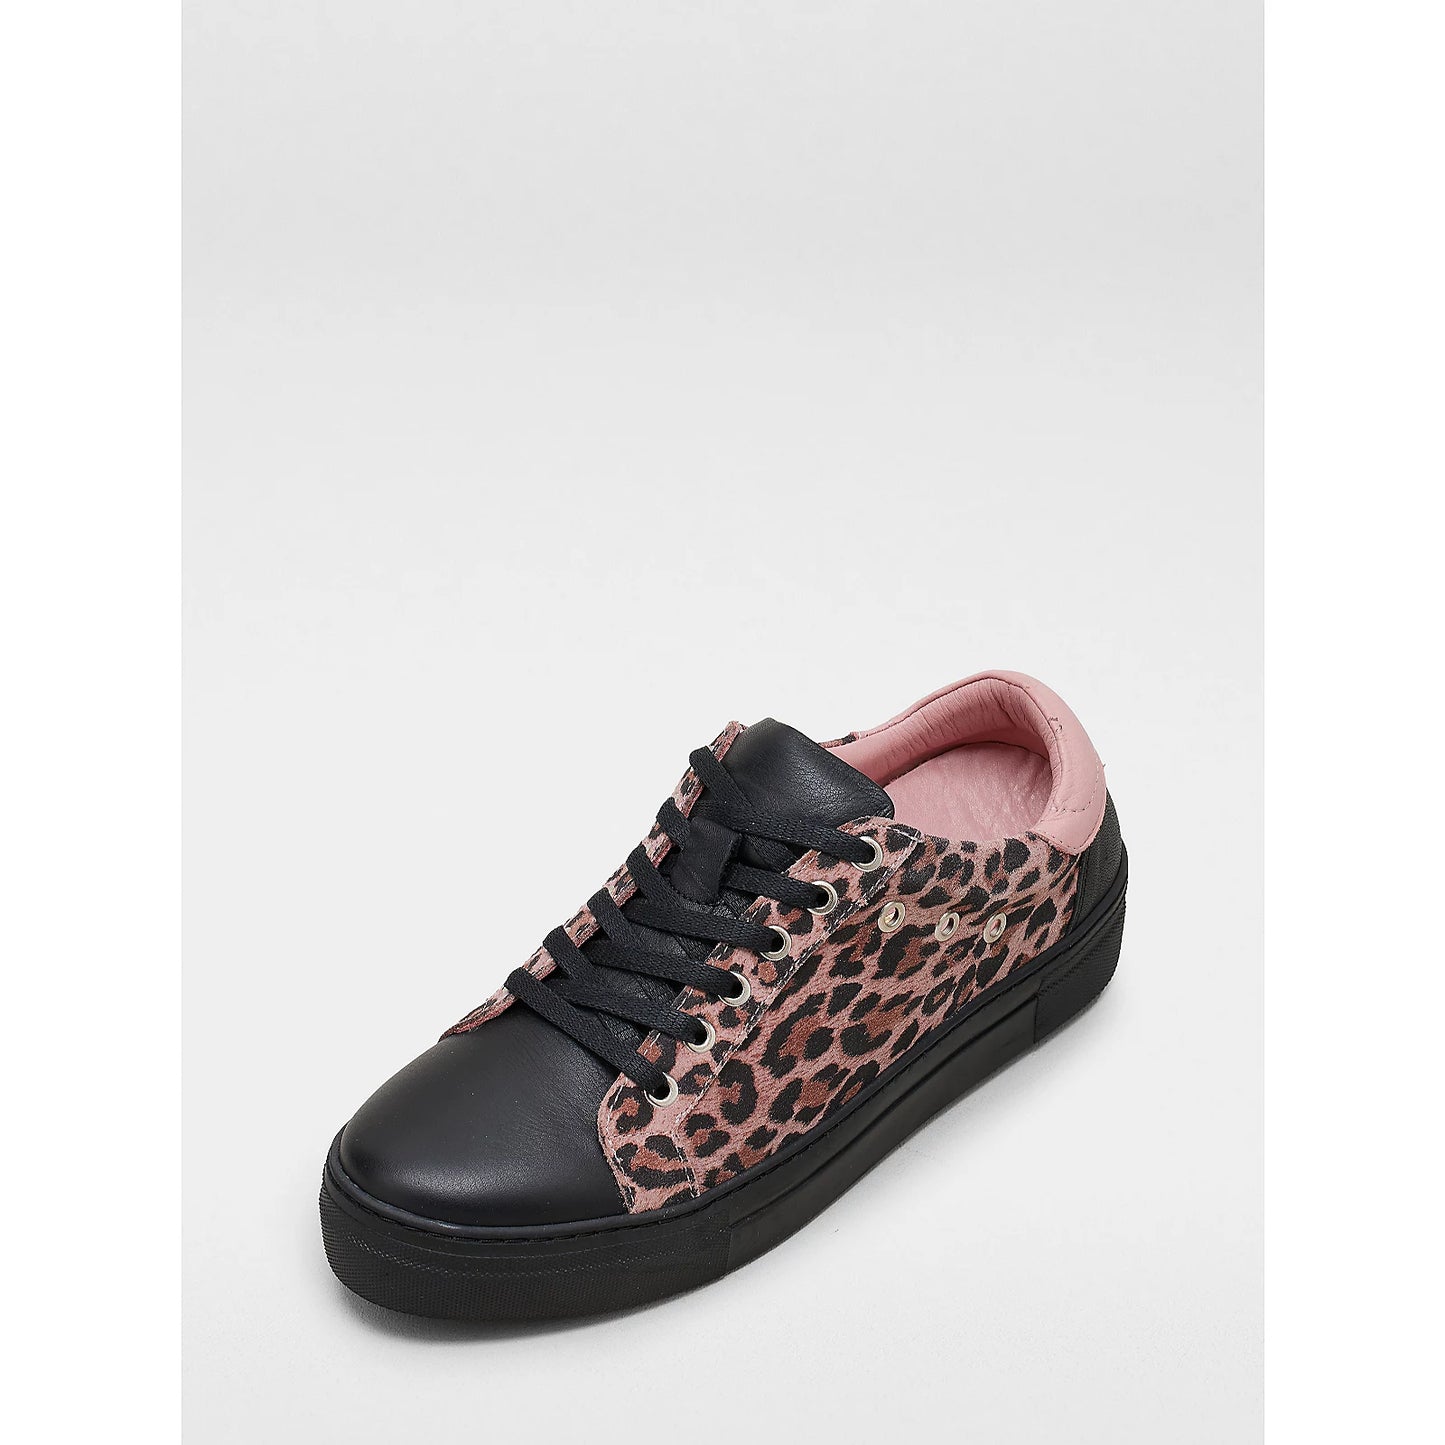 Adesso Jax Pink Leopard Leather Trainer